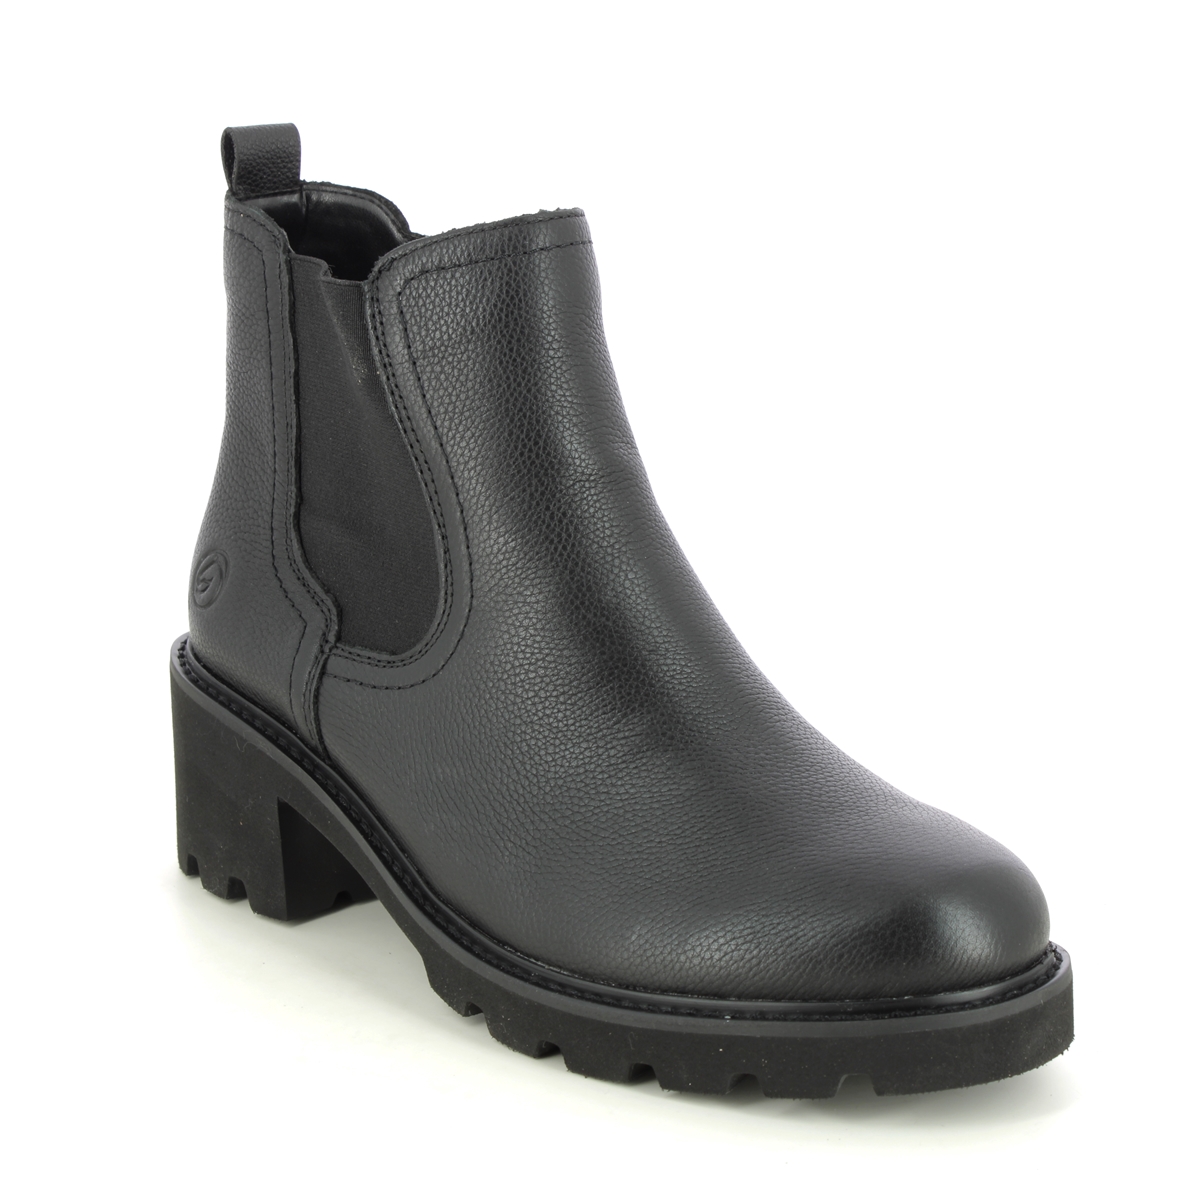 Remonte Bodochel Black Leather Womens Chelsea Boots D0A70-01 In Size 41 In Plain Black Leather